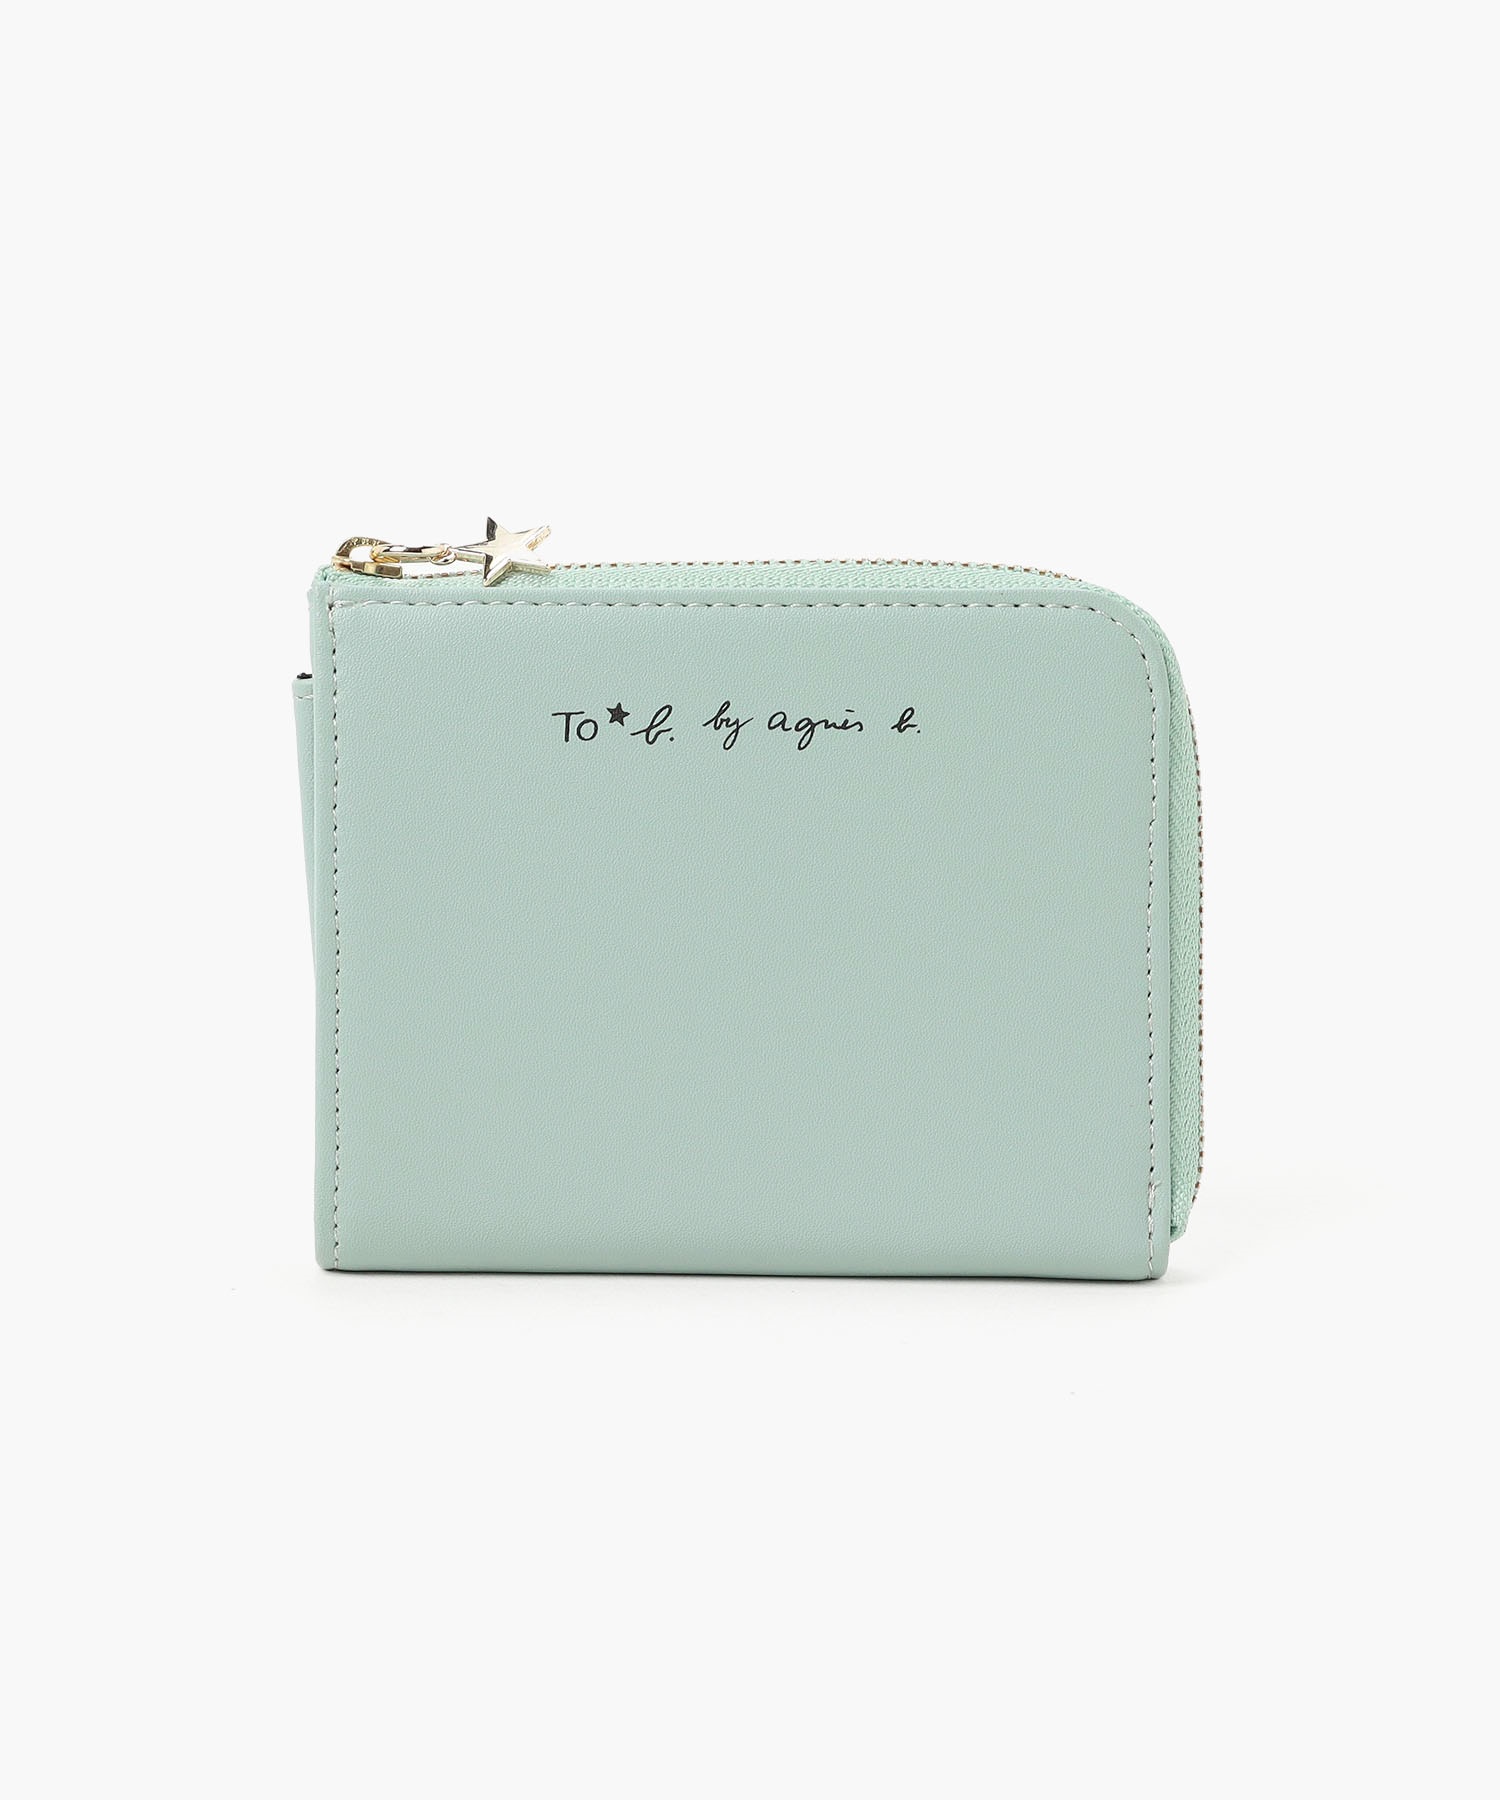 【Outlet】WS37 WALLET ロゴプリントウォレット